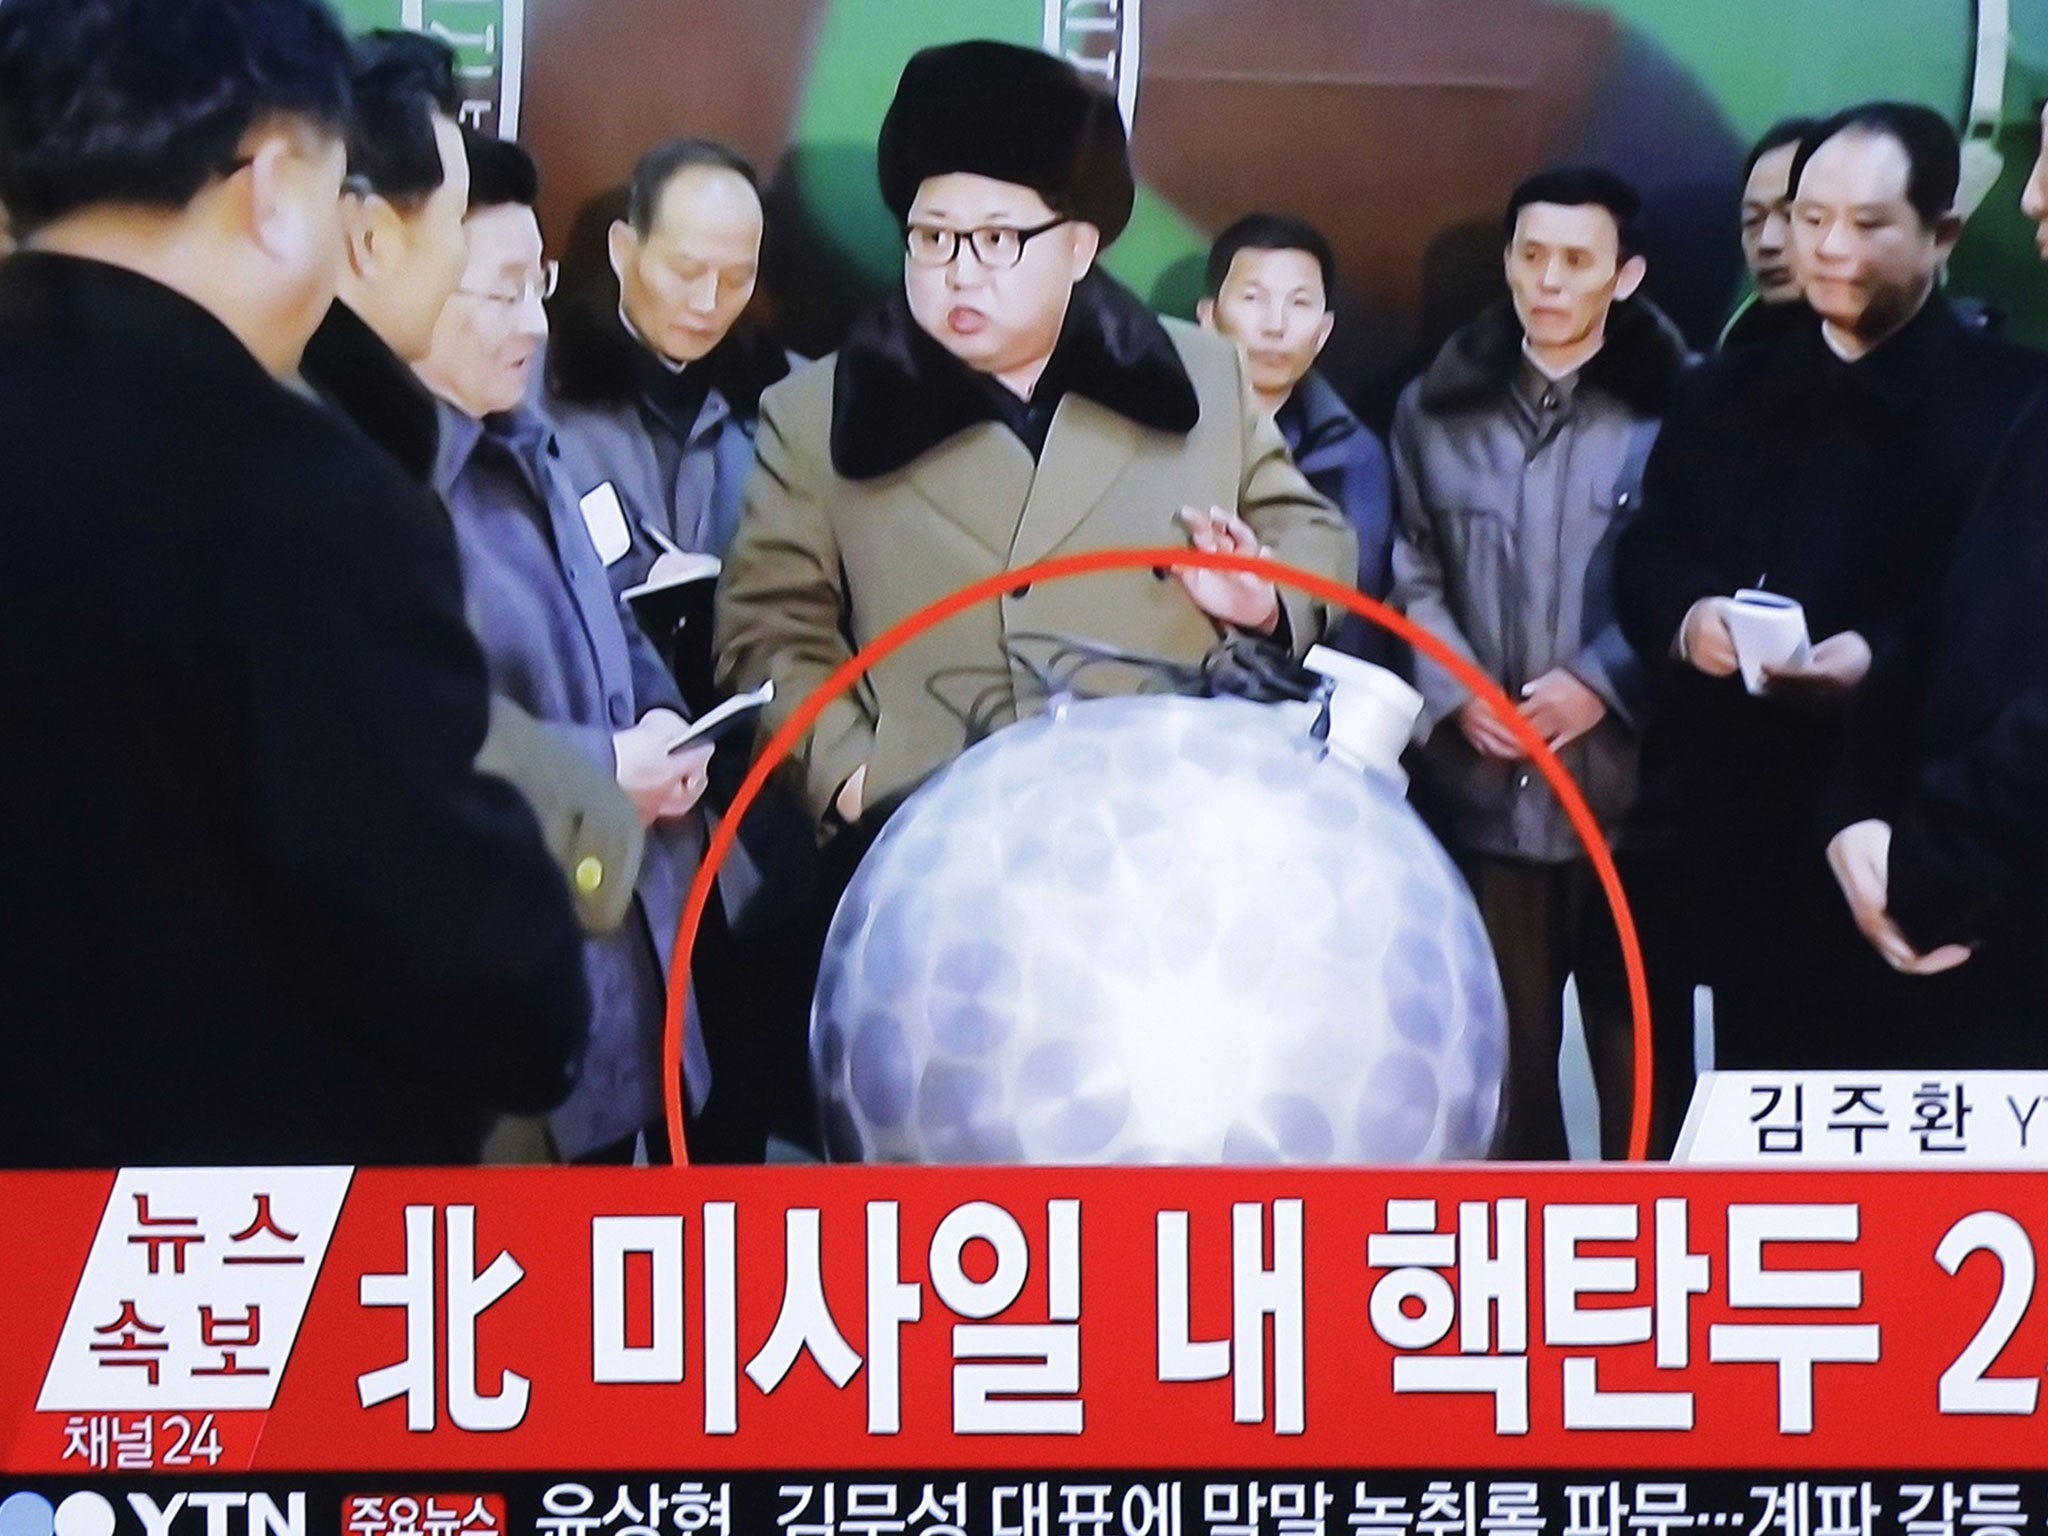 An image released by North Korea last week in which it claimed to have developed a miniature nuclear warhead